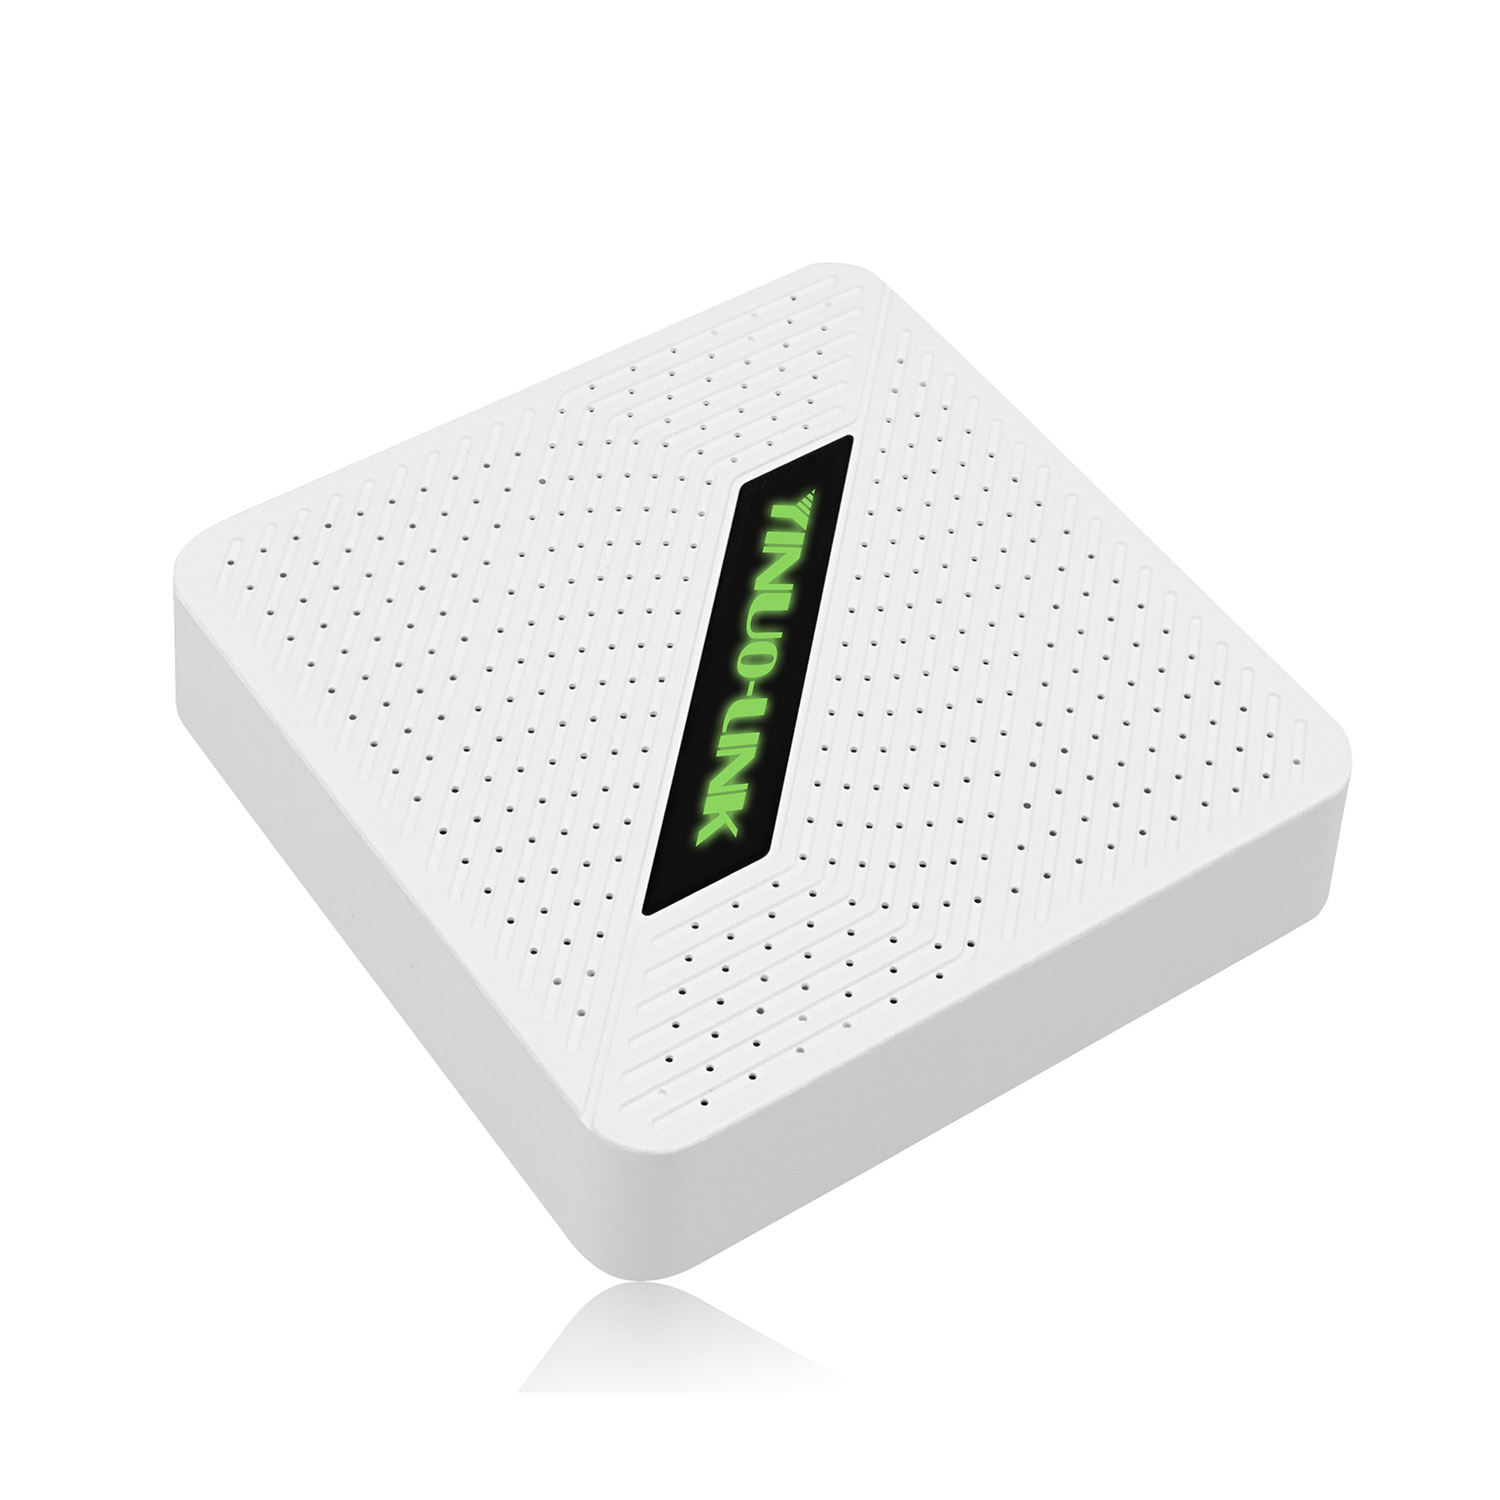 Y2 AX1800 Dual Band Wi-Fi6 Router